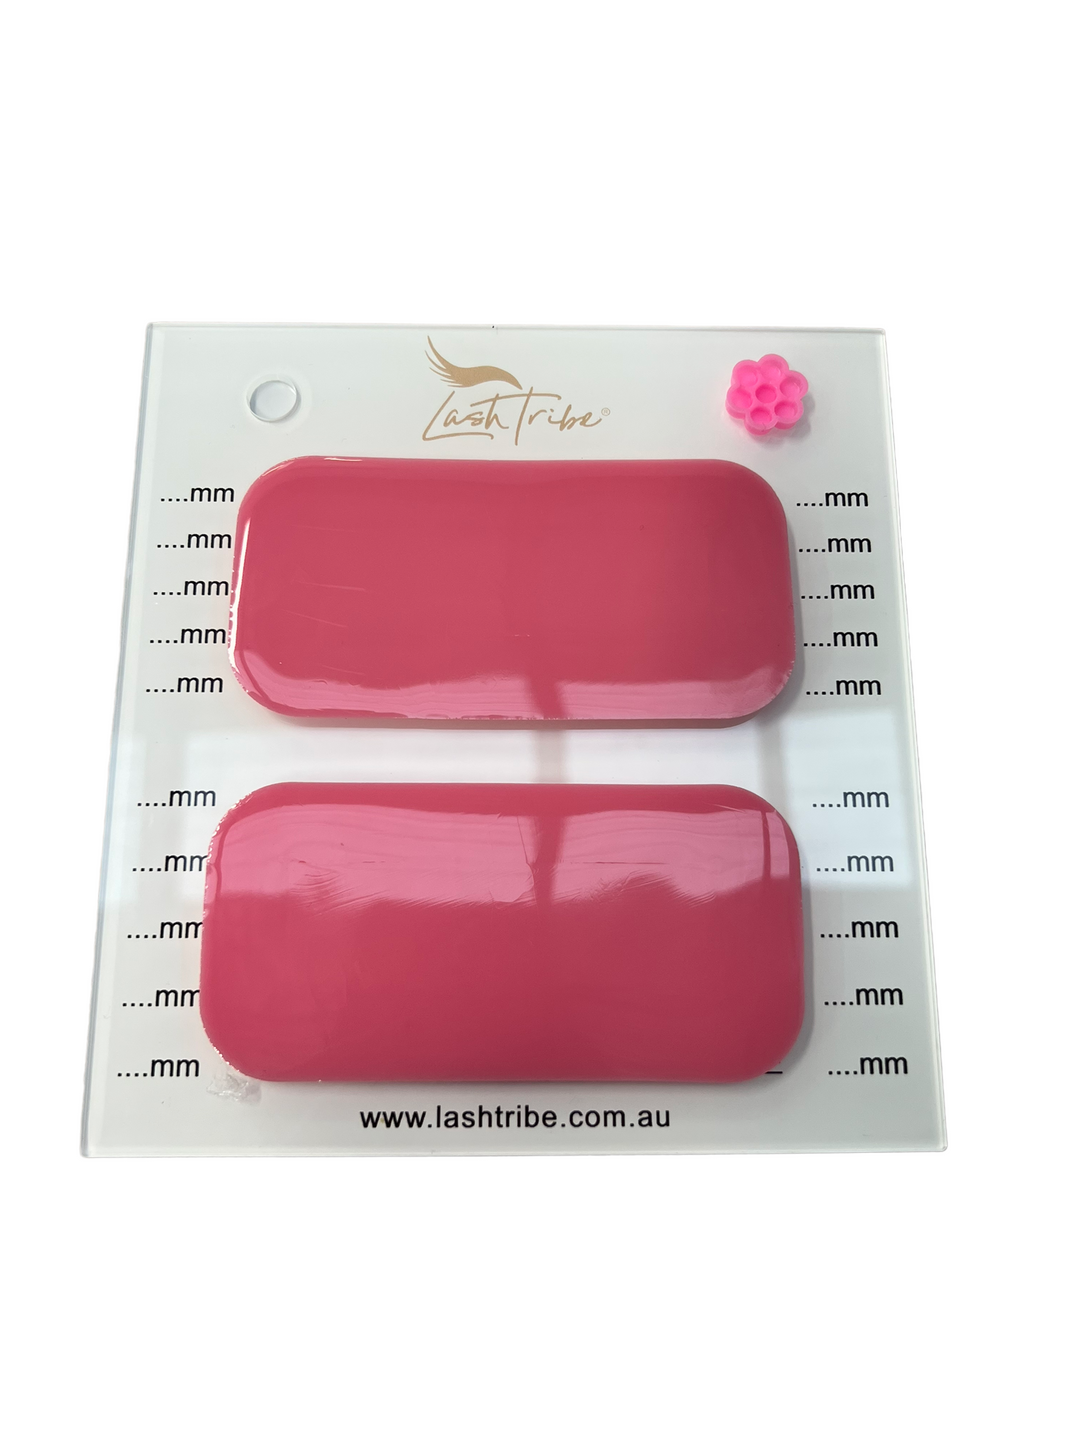 a pair of Lash Tribe pink nail polishes in a plastic container.